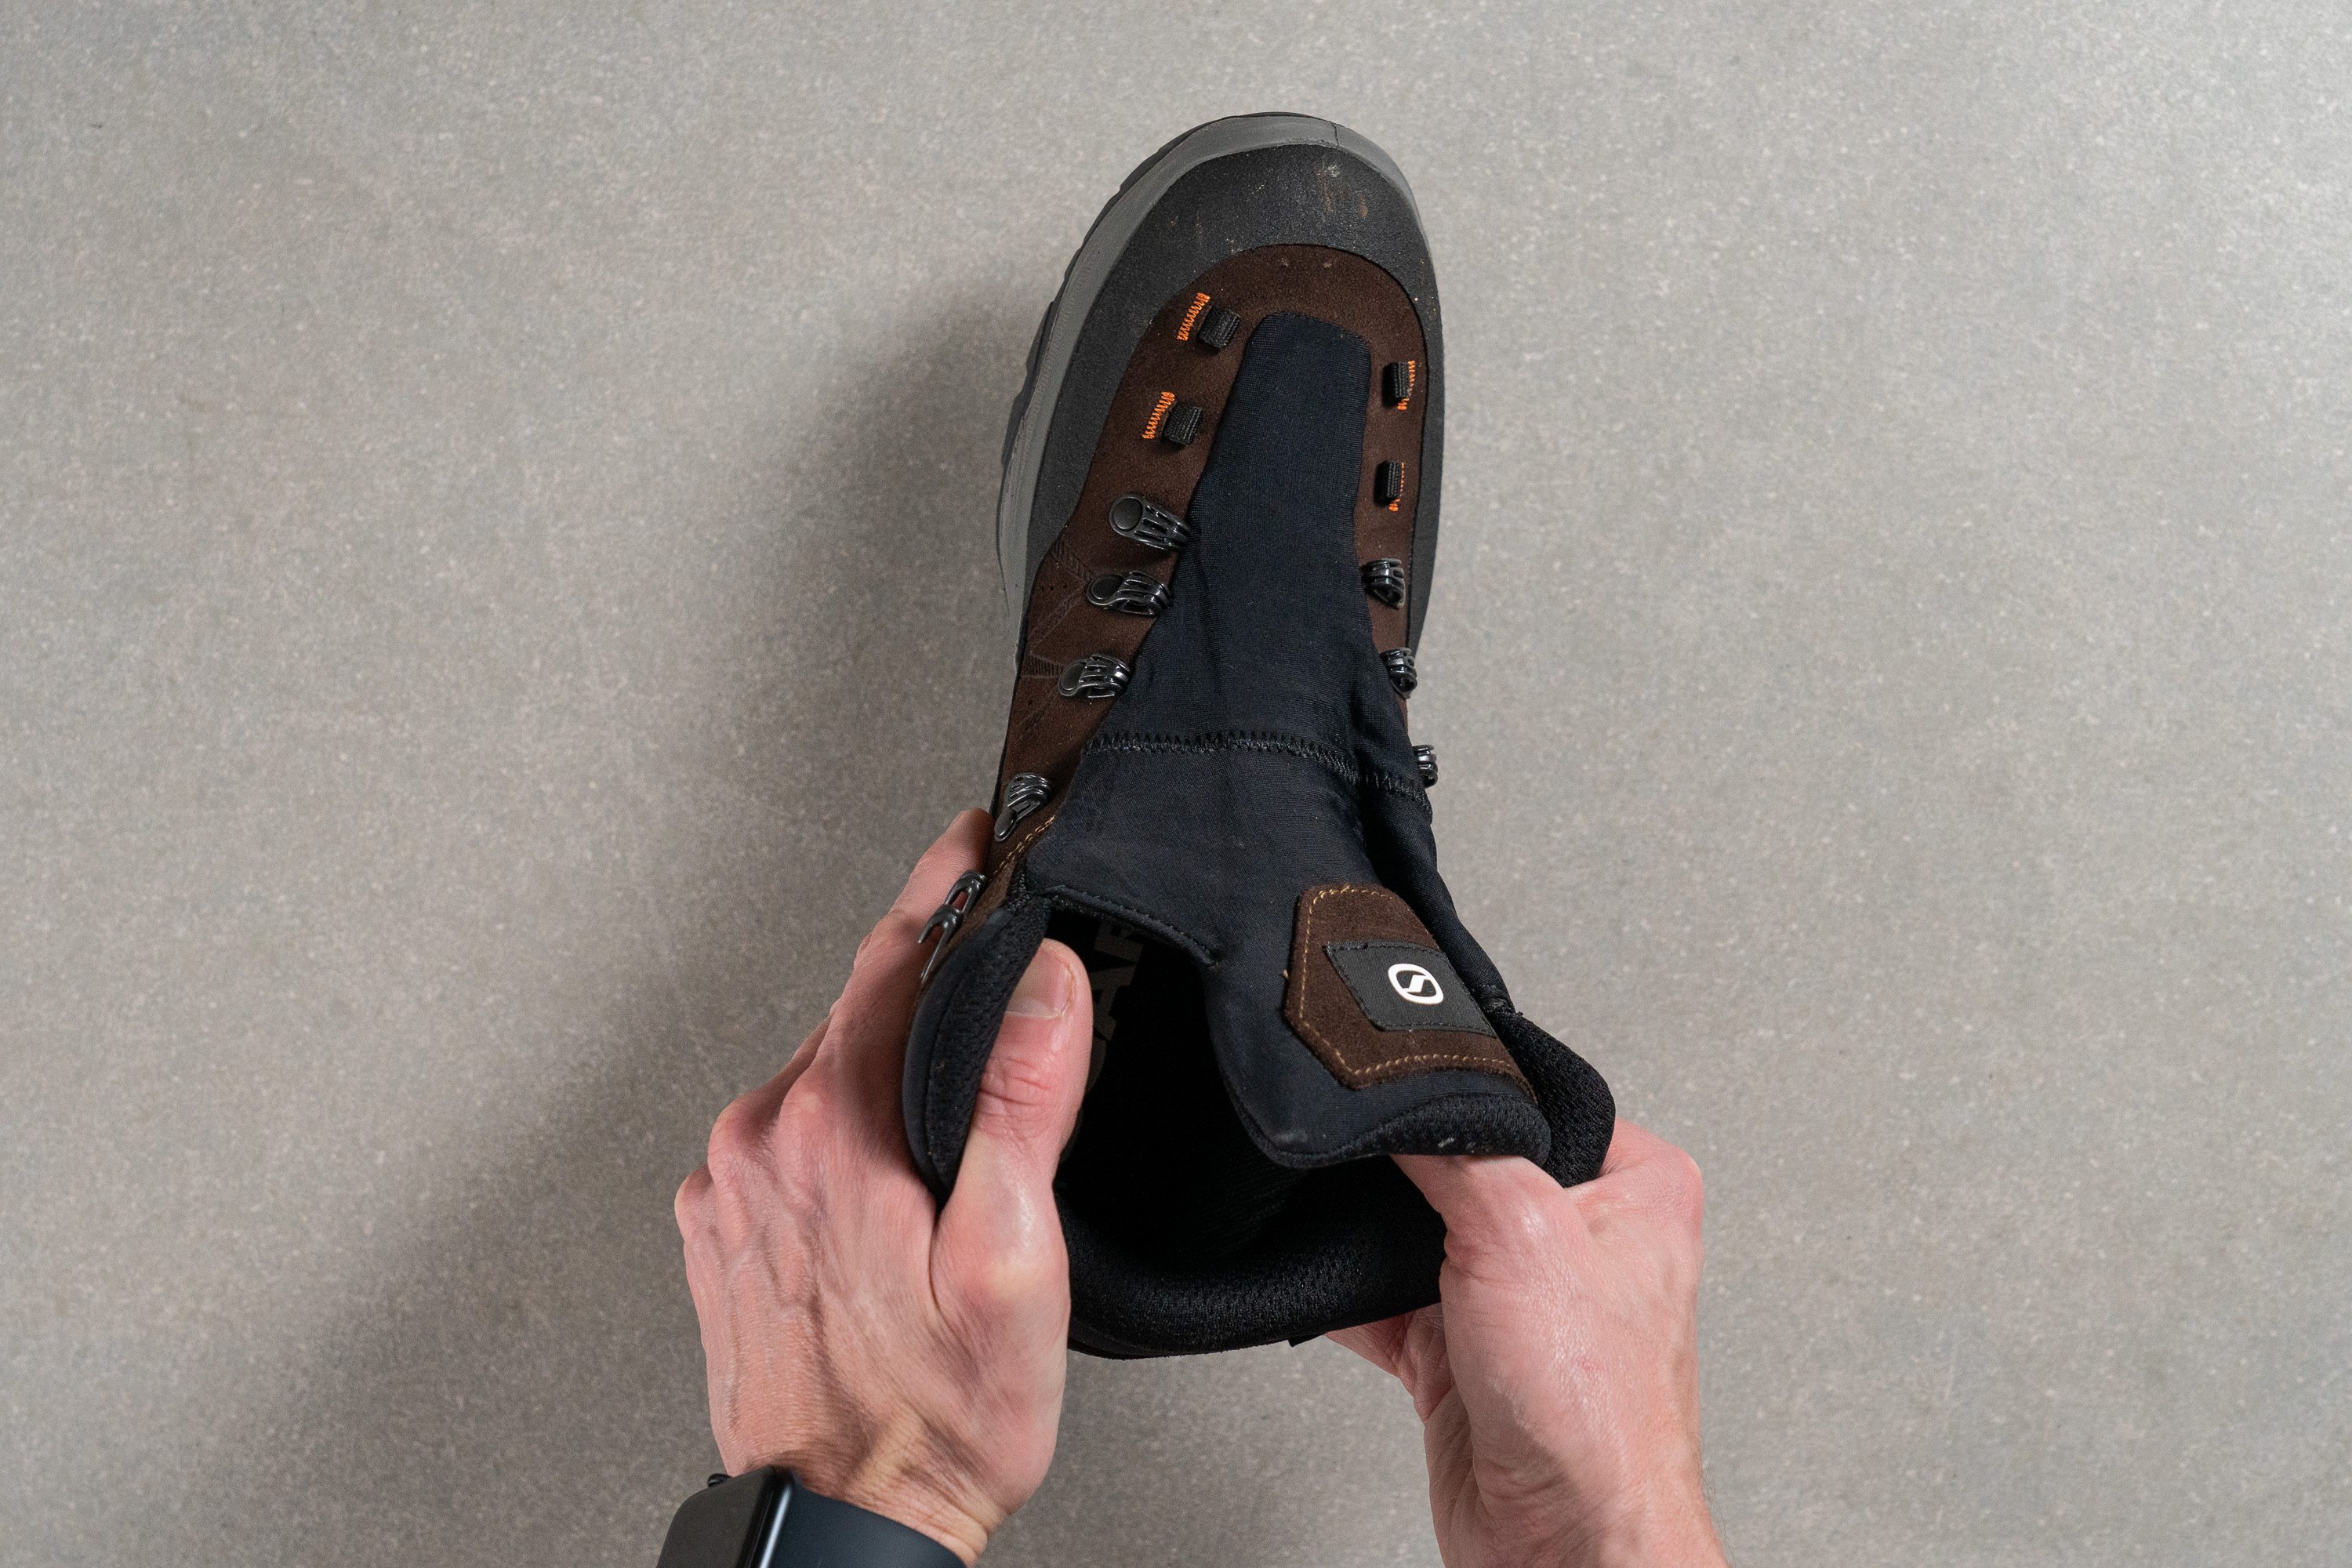 For a boot with a more natural, foot-shaped silhouette, we recommend checking out the Tongue: gusset type